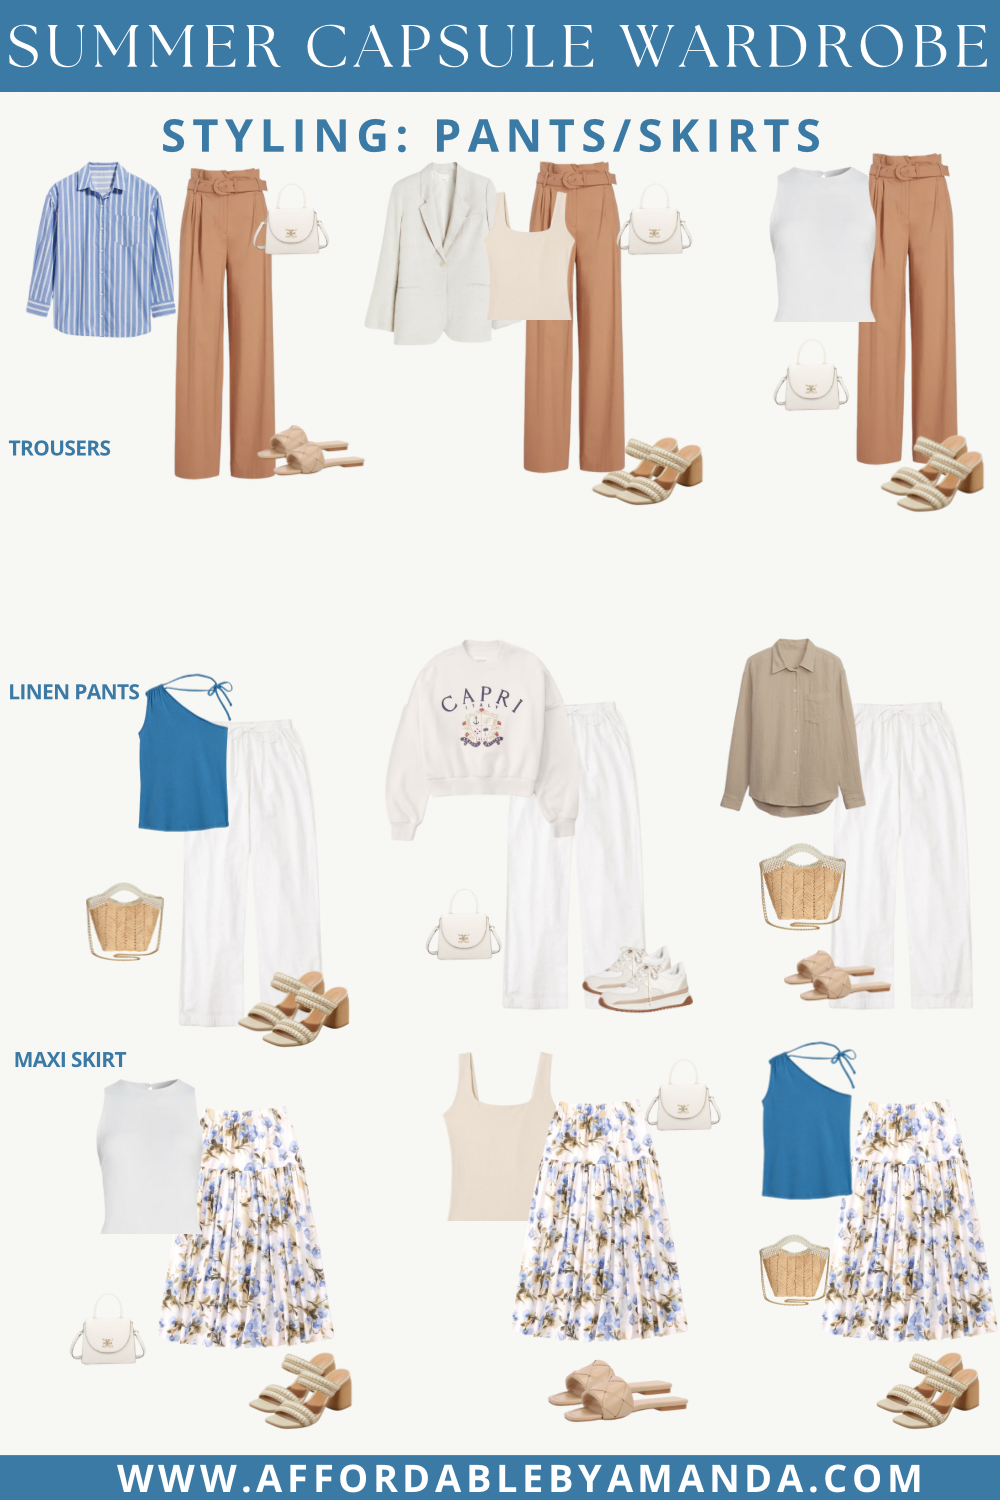 Summer Capsule Wardrobe - Affordable by Amanda styles pants and skirts for a summer capsule wardrobe